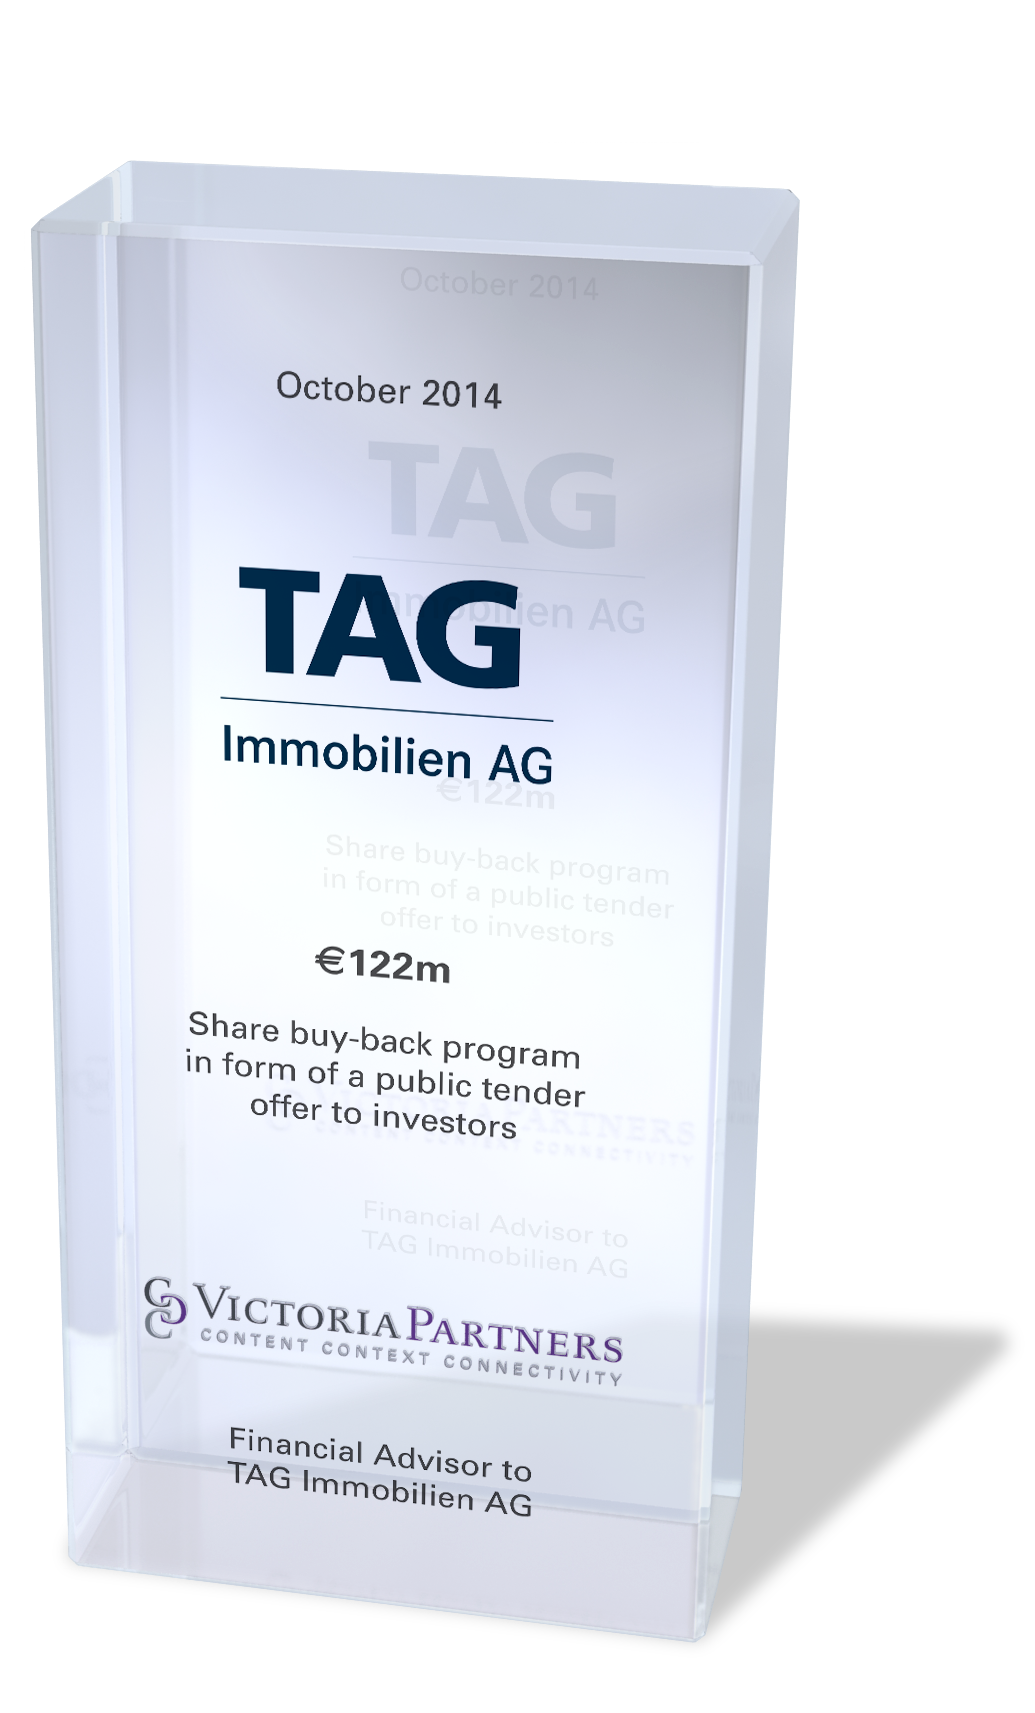 VICTORIAPARTNERS - Financial Advisor to TAG Immobilien AG - October 2014